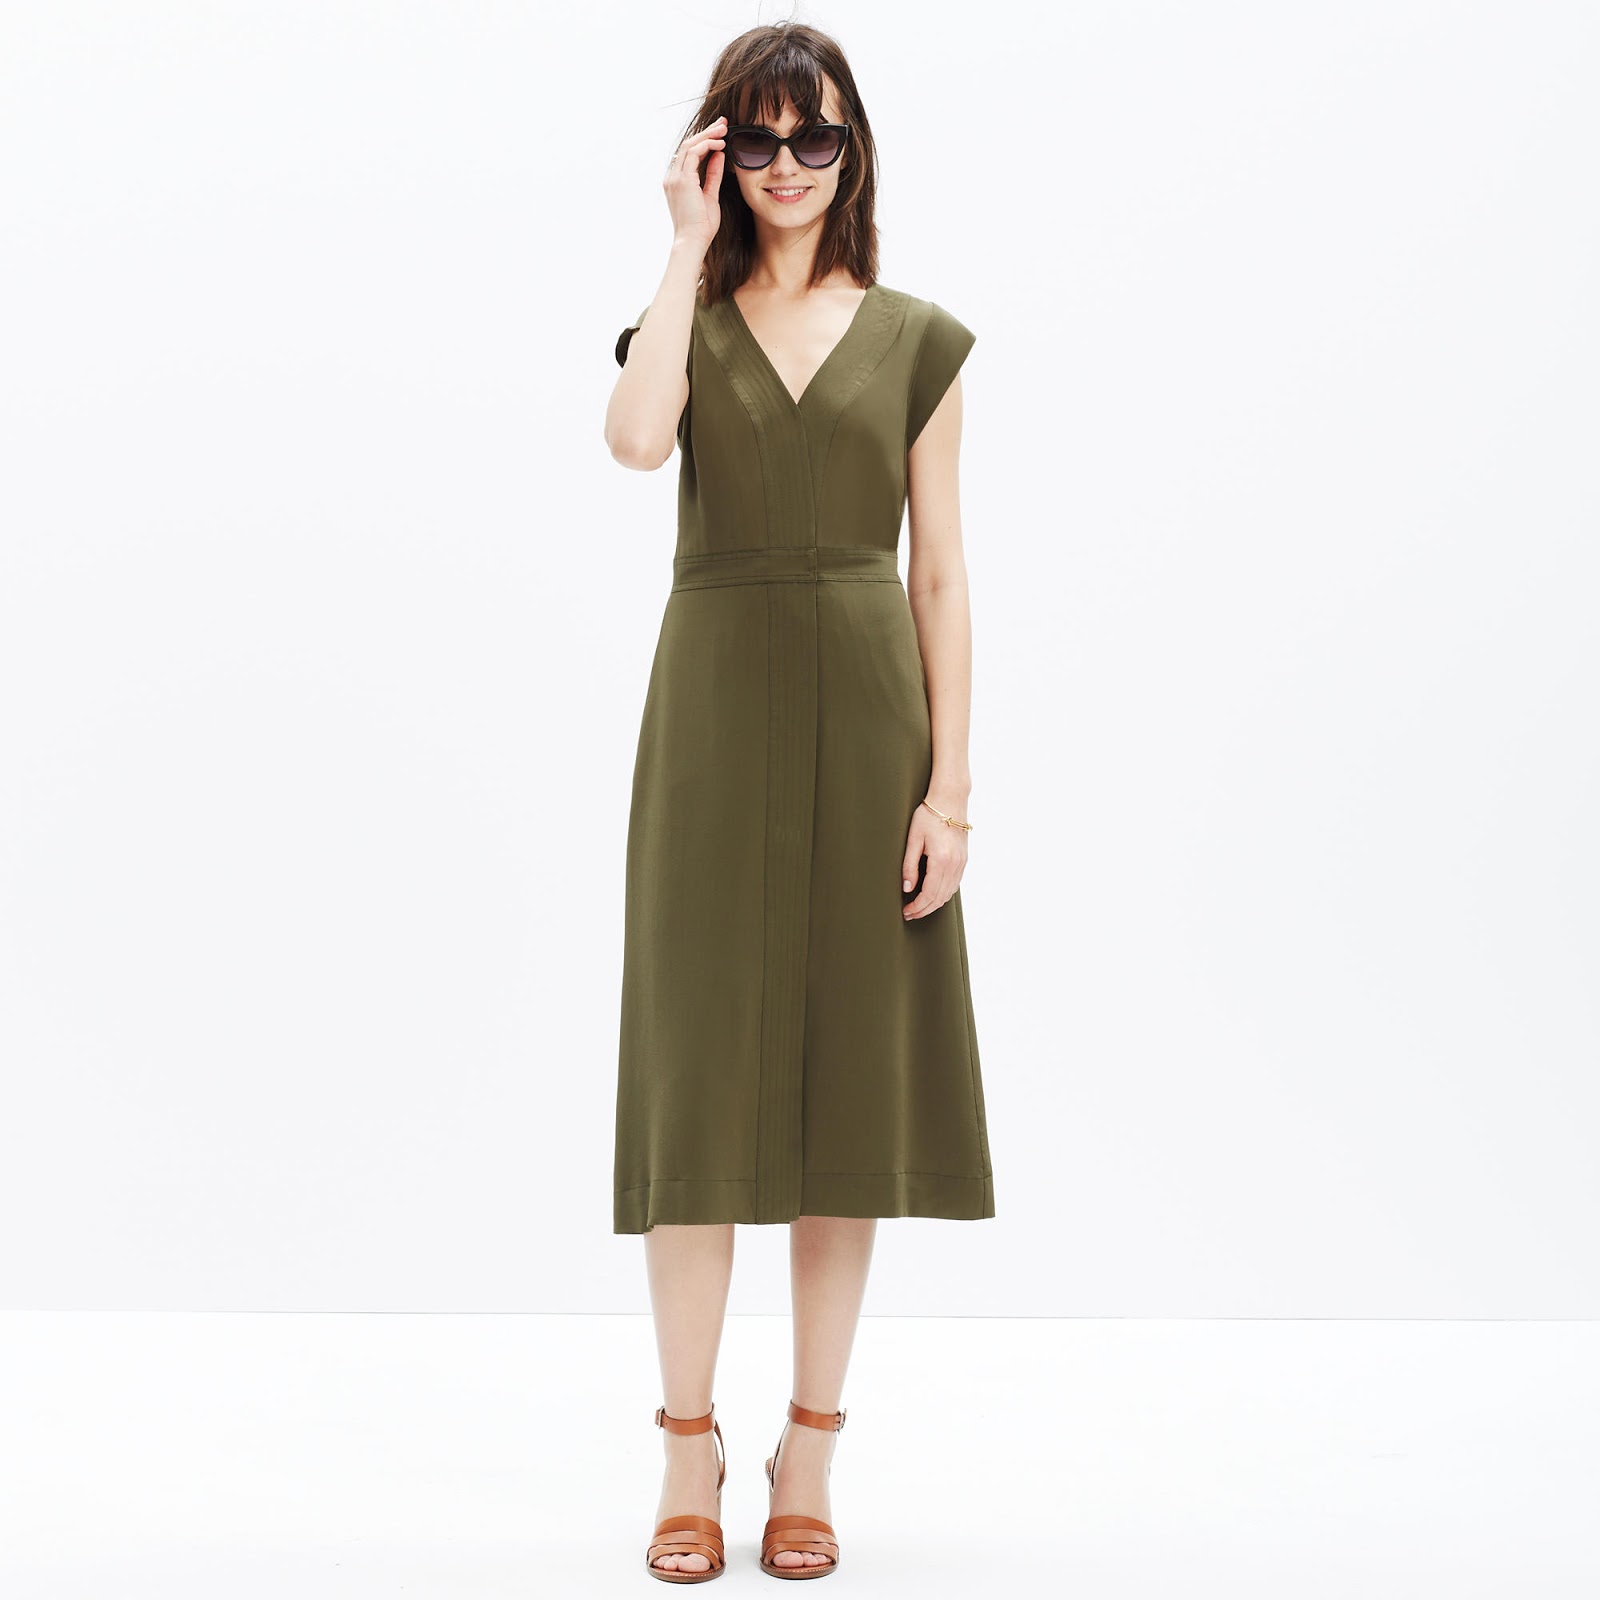 NEW ARRIVALS: early fall at Madewell - NYC Recessionista